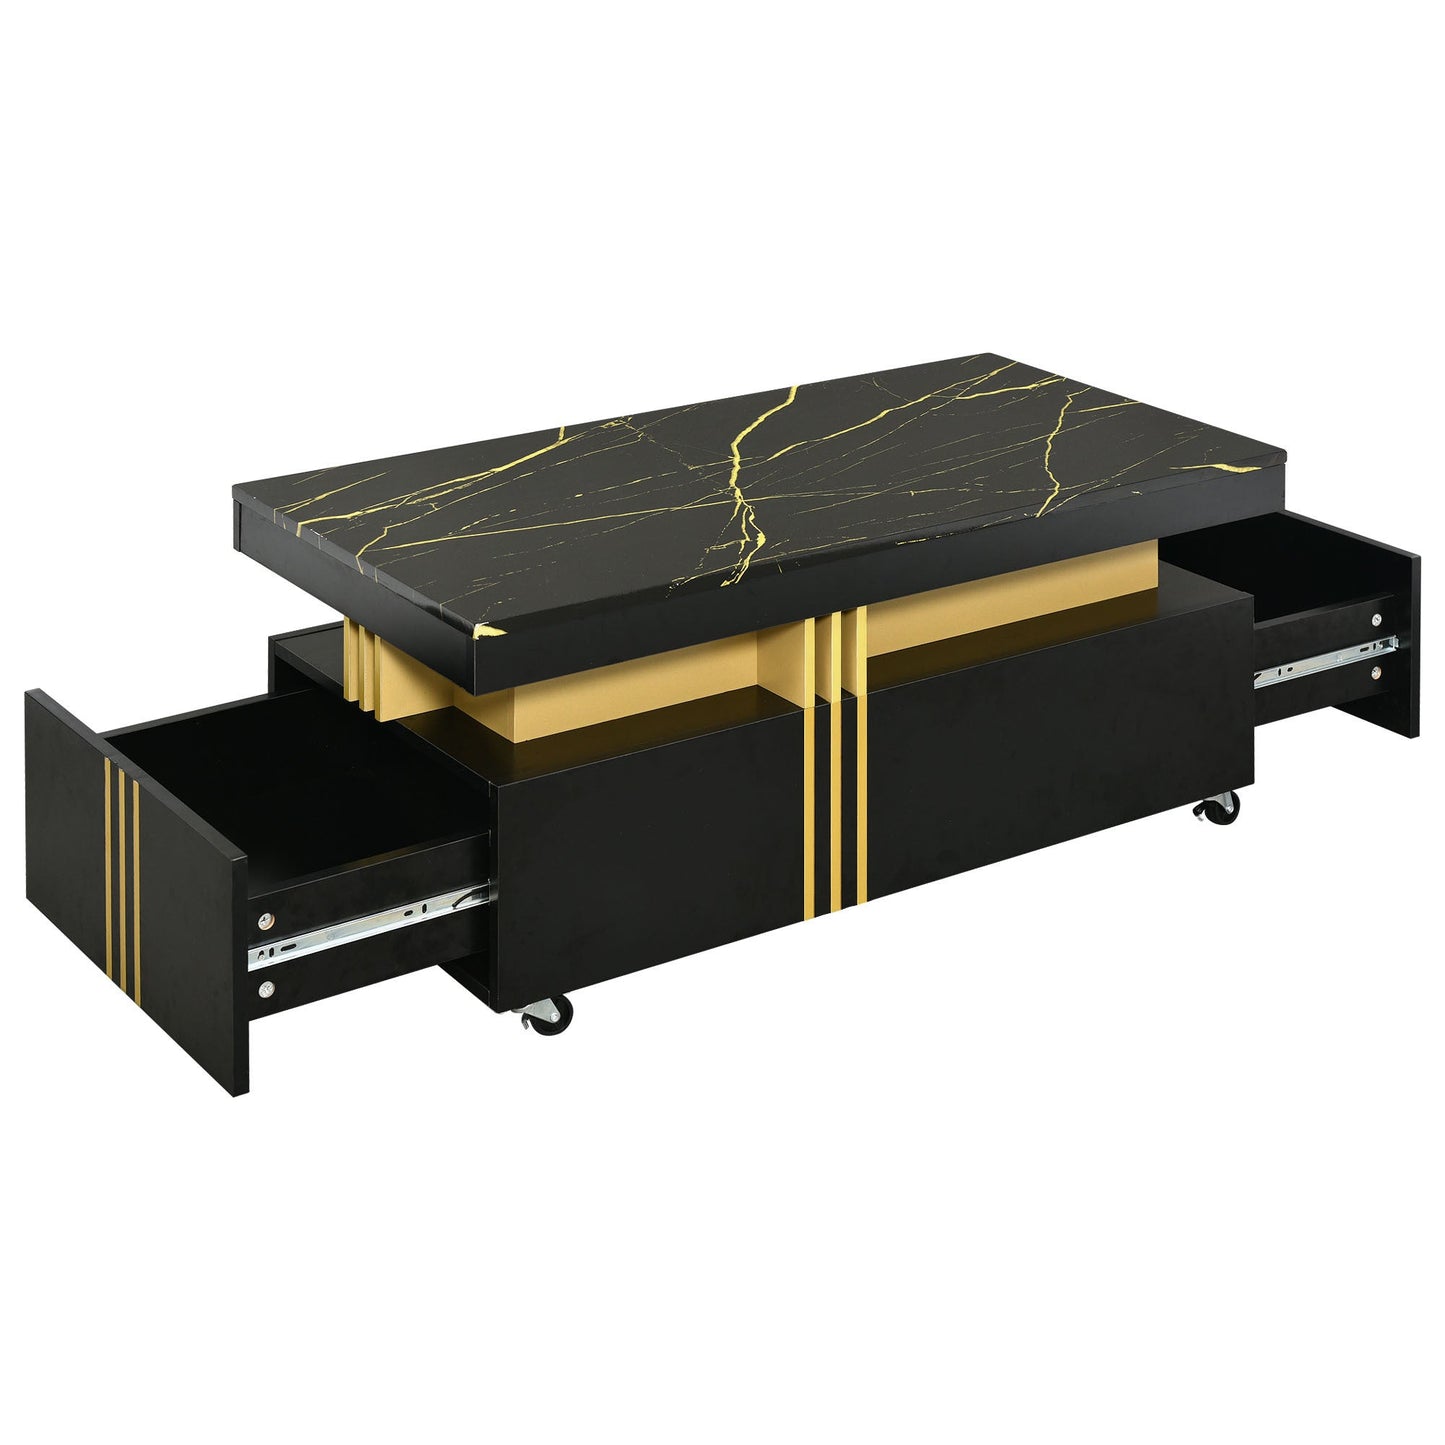 Contemporary Coffee Table with Faux Marble Top, Rectangle Cocktail Table with Caster Wheels, Moderate Luxury Center Table with Gold Metal Bars for Living Room, Black